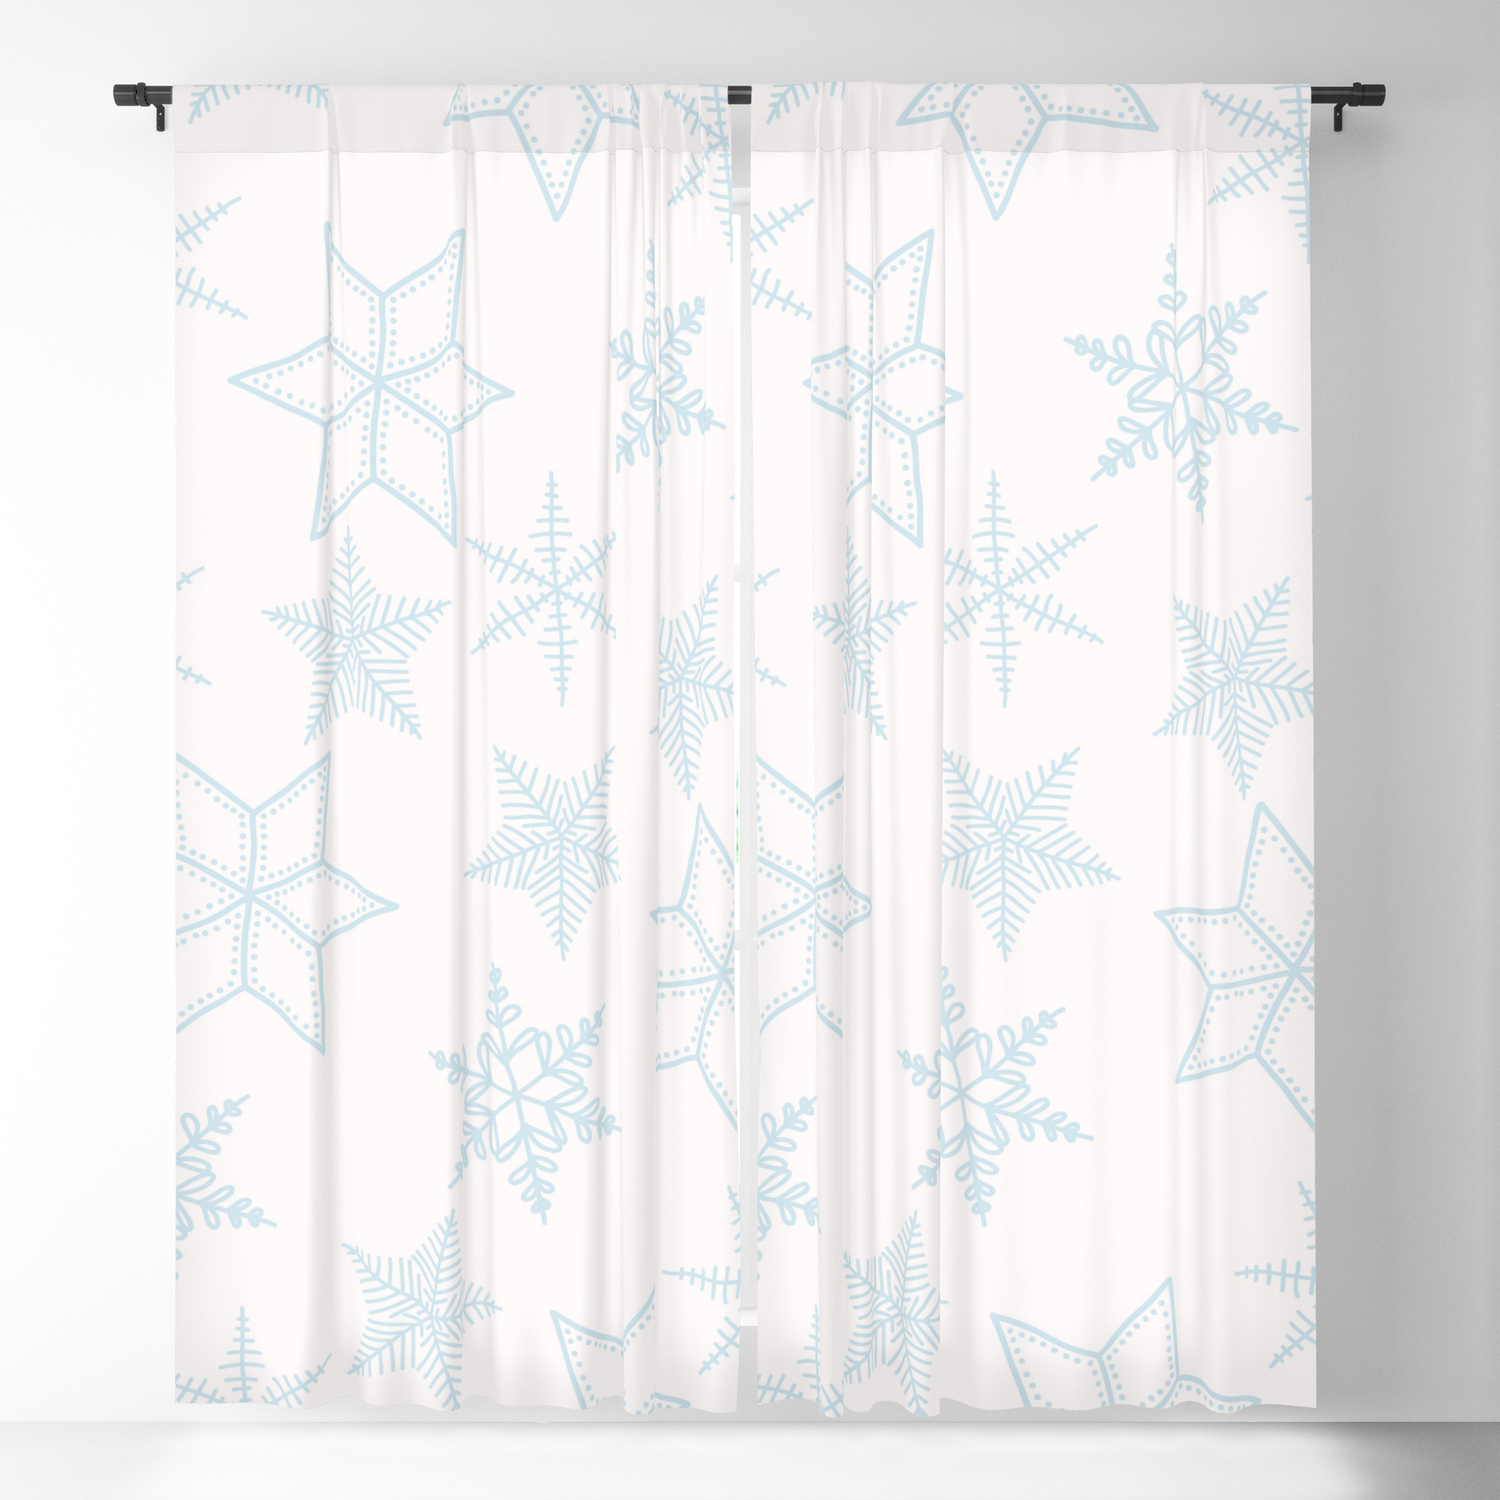 Light Blue Snowflakes On White Background Blackout Curtain by LaVieClaire |  Society6